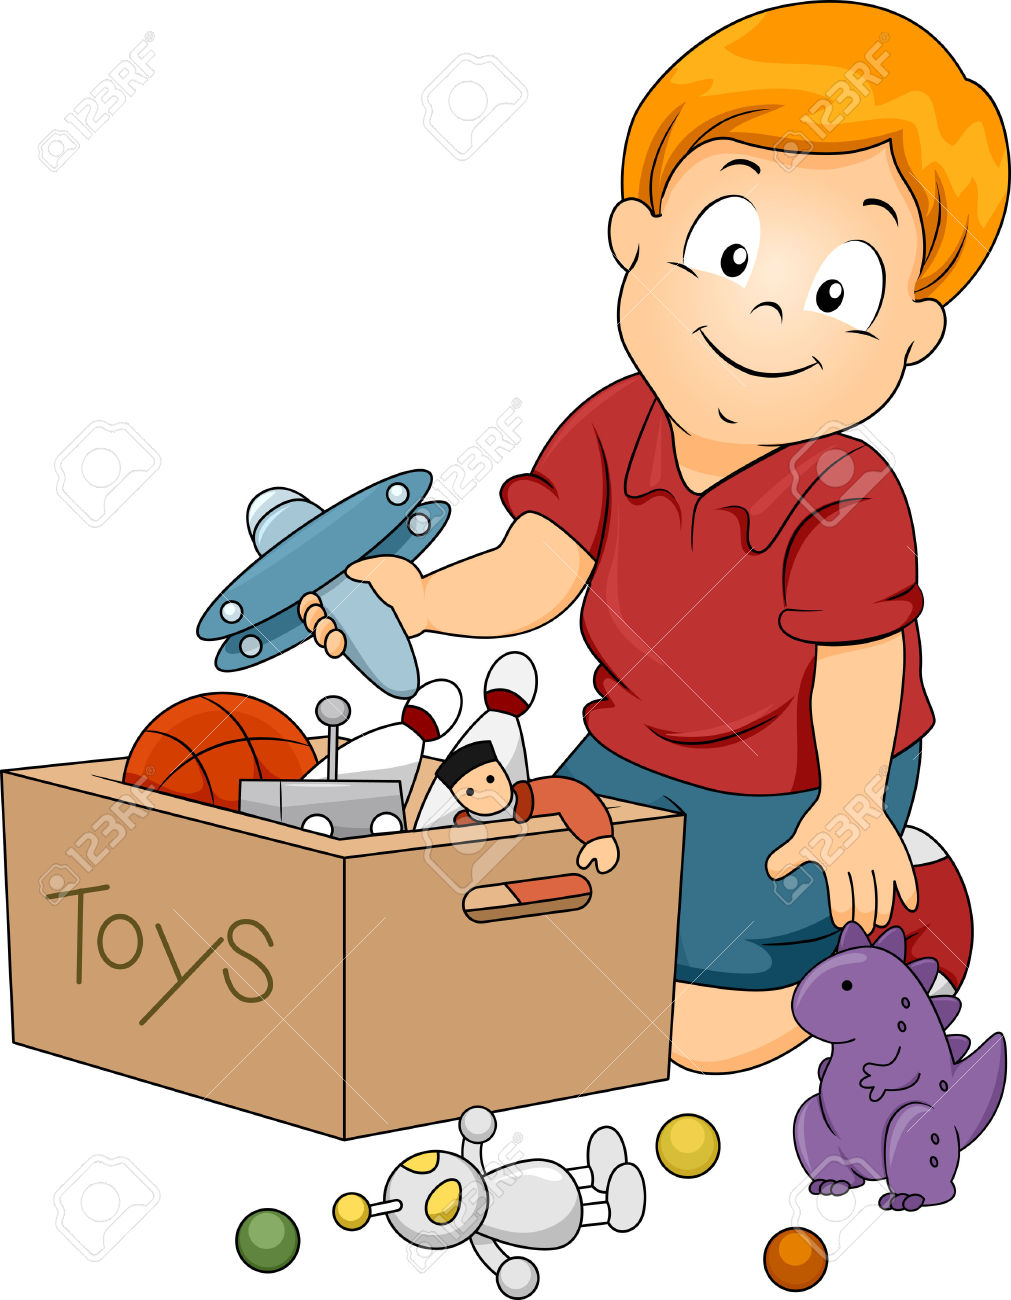 Putting toys station . Toy clipart away